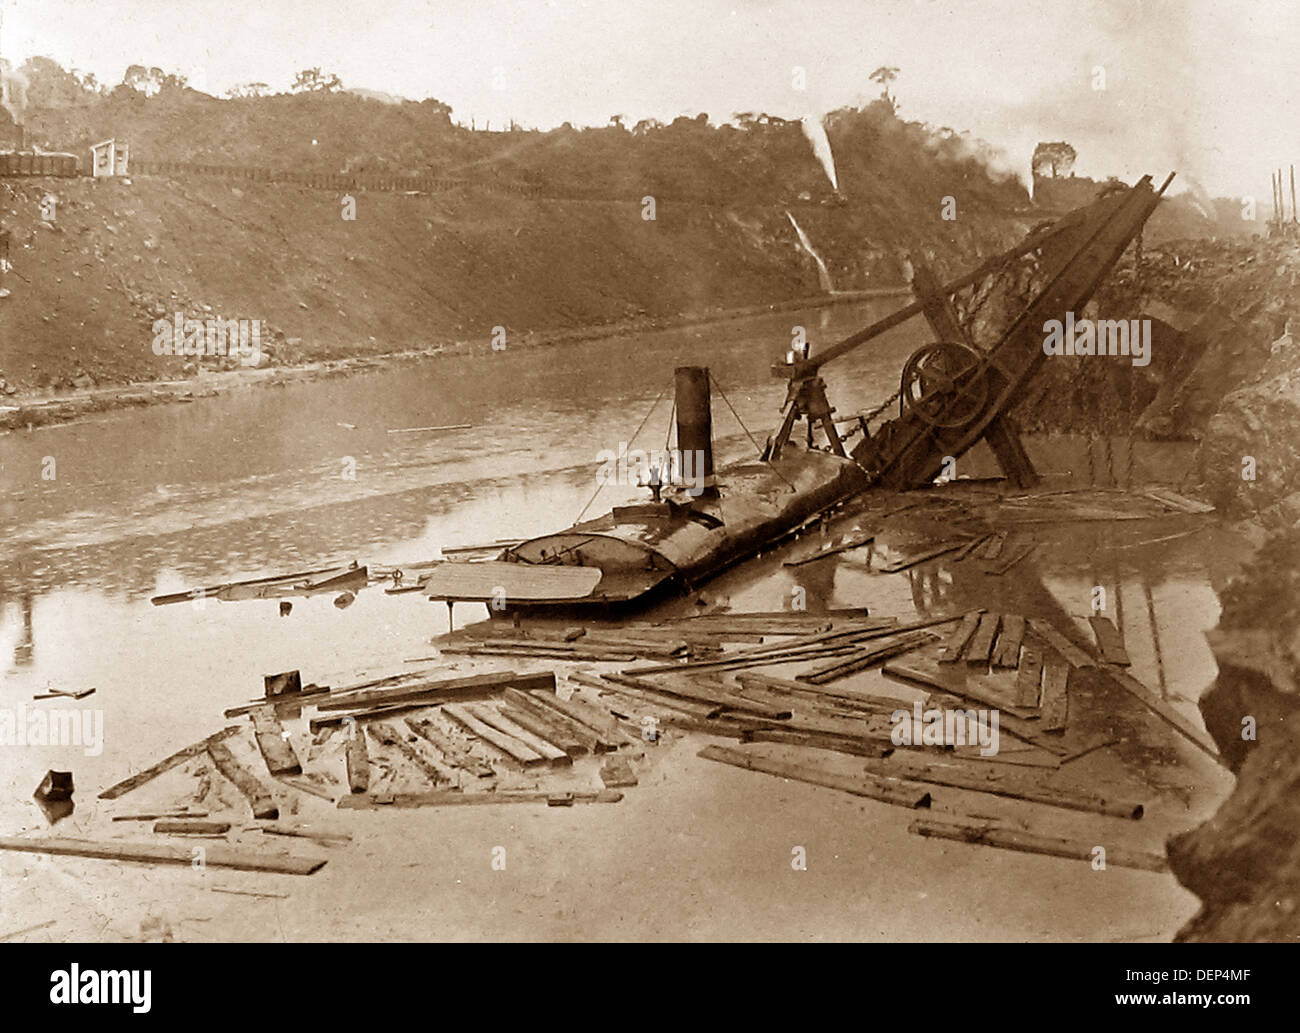 Construction of the Panama Canal - steam shovel in flooded area - early 1900s Stock Photo